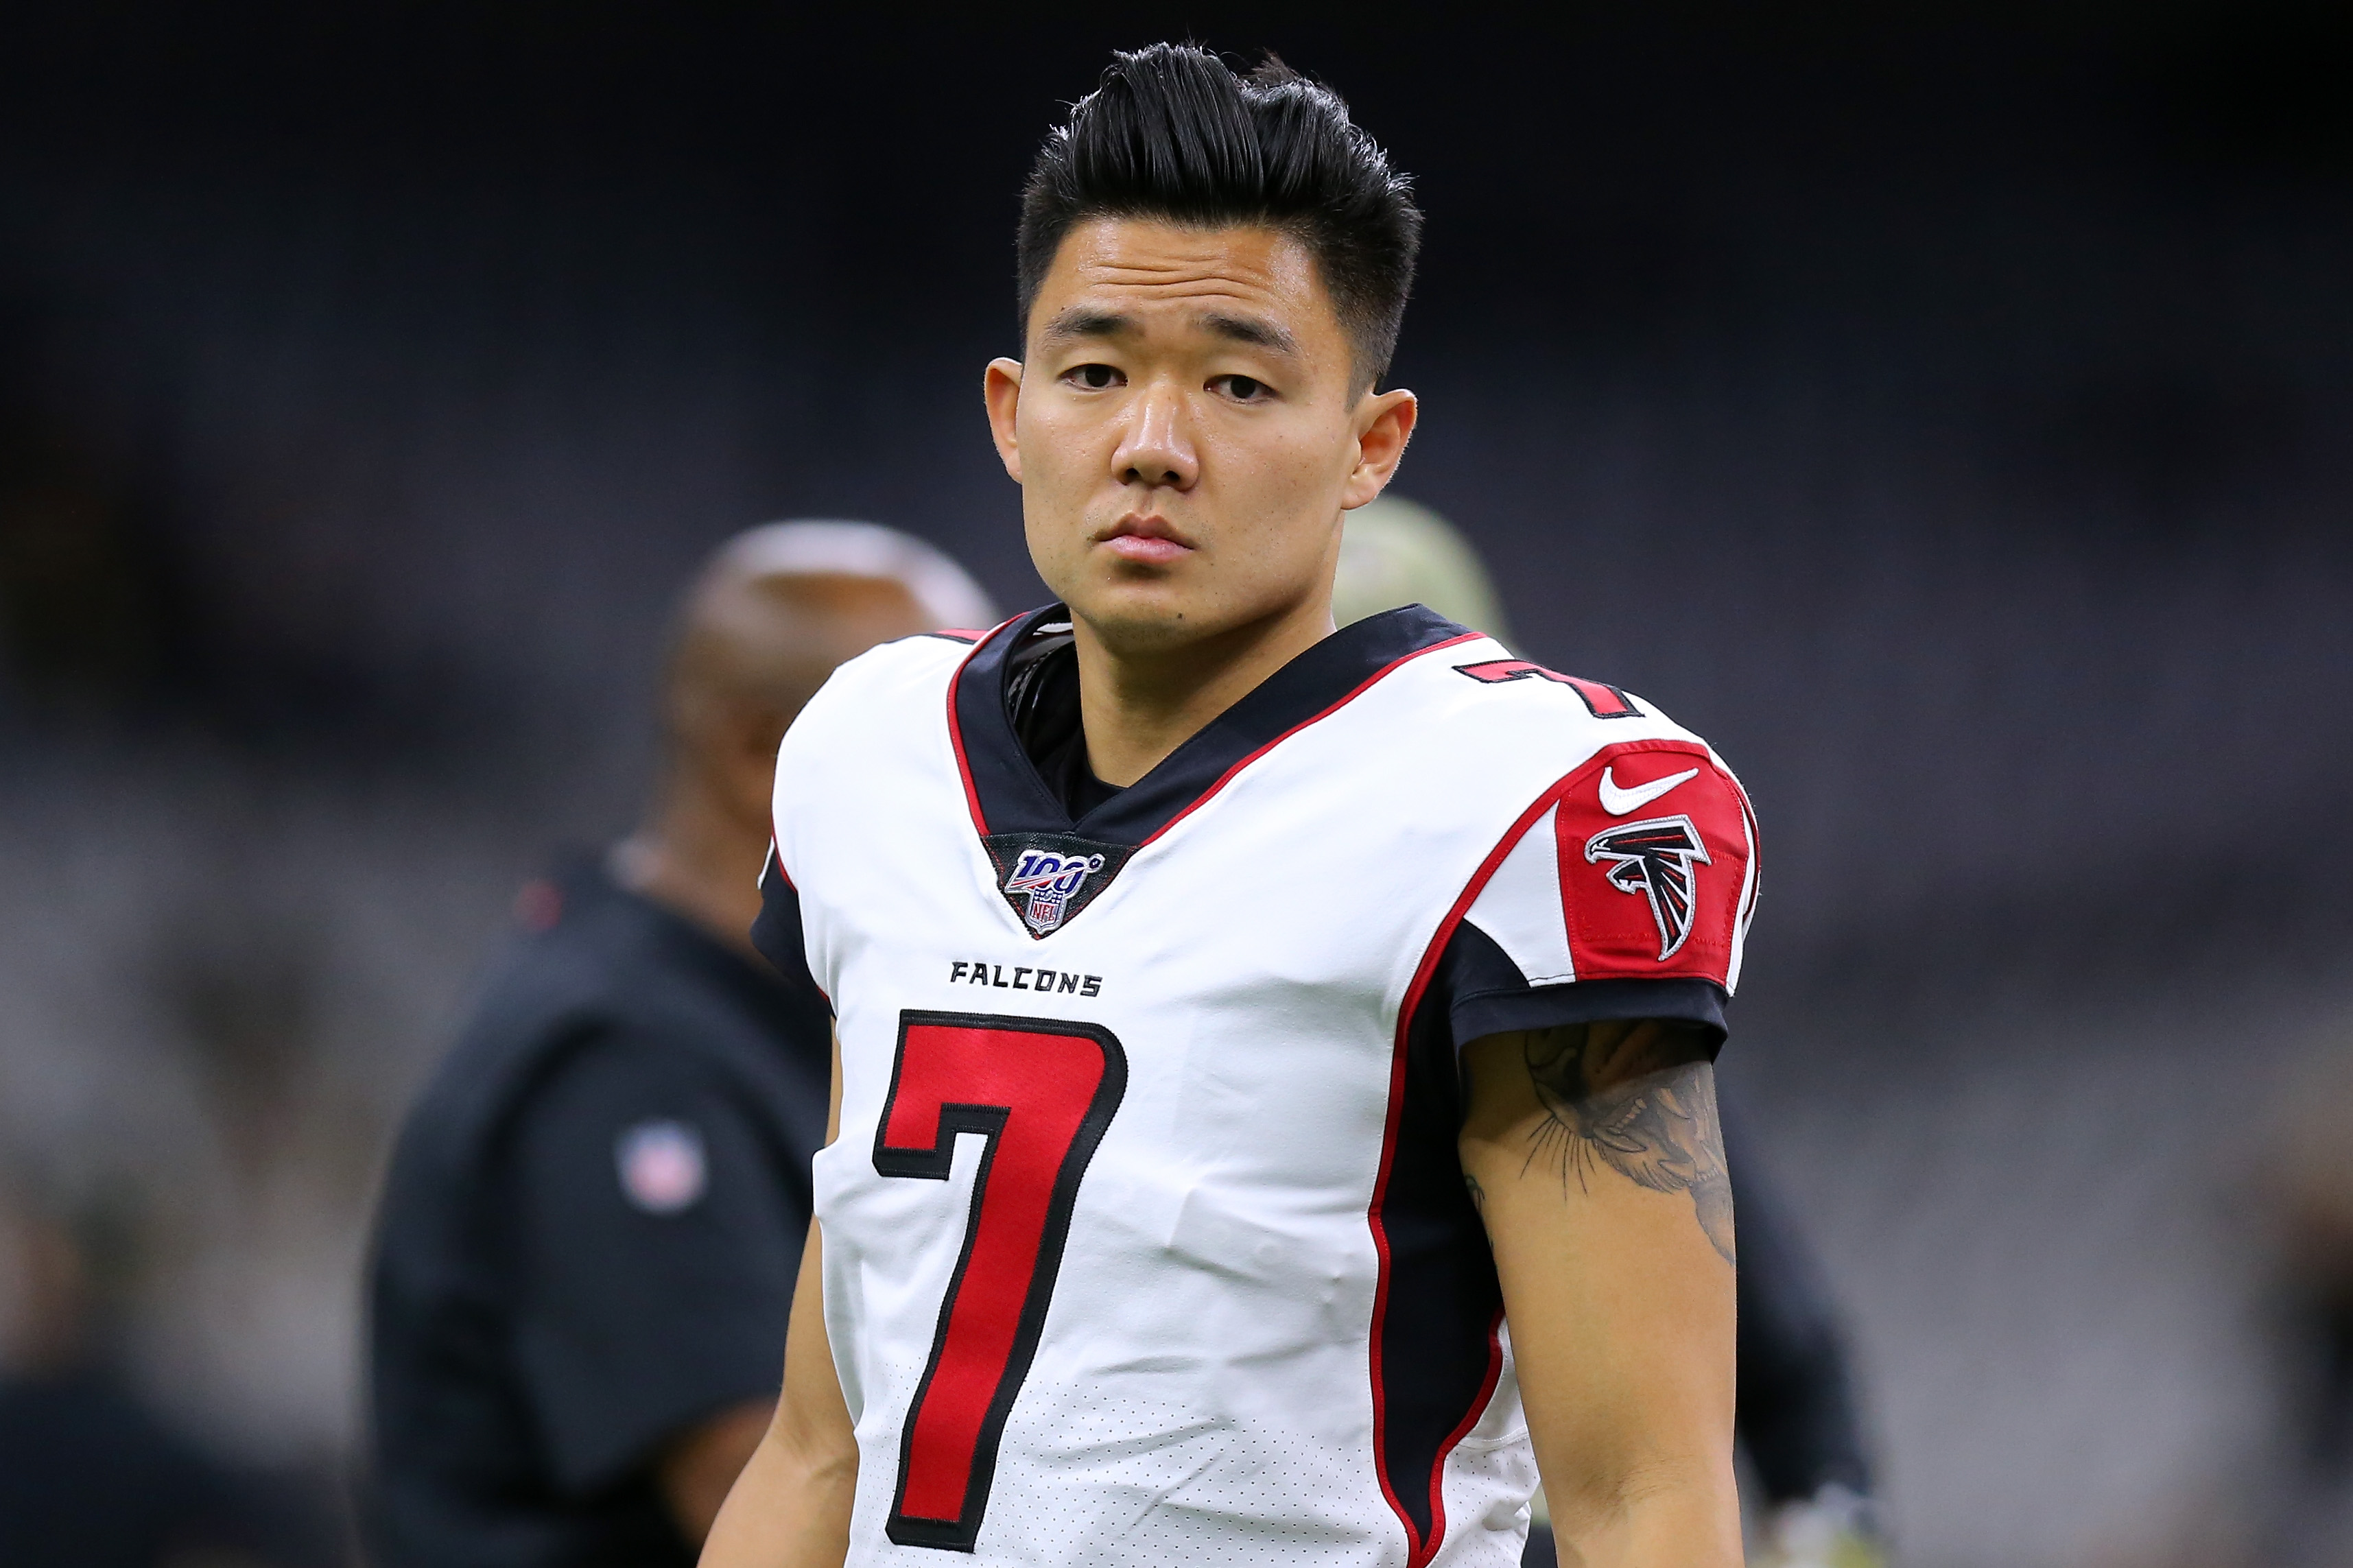 Falcons Kicker Younghoe Koo Just Shared a Powerful Message After the Atlanta Shooting: ‘I Have Heard the Jokes’